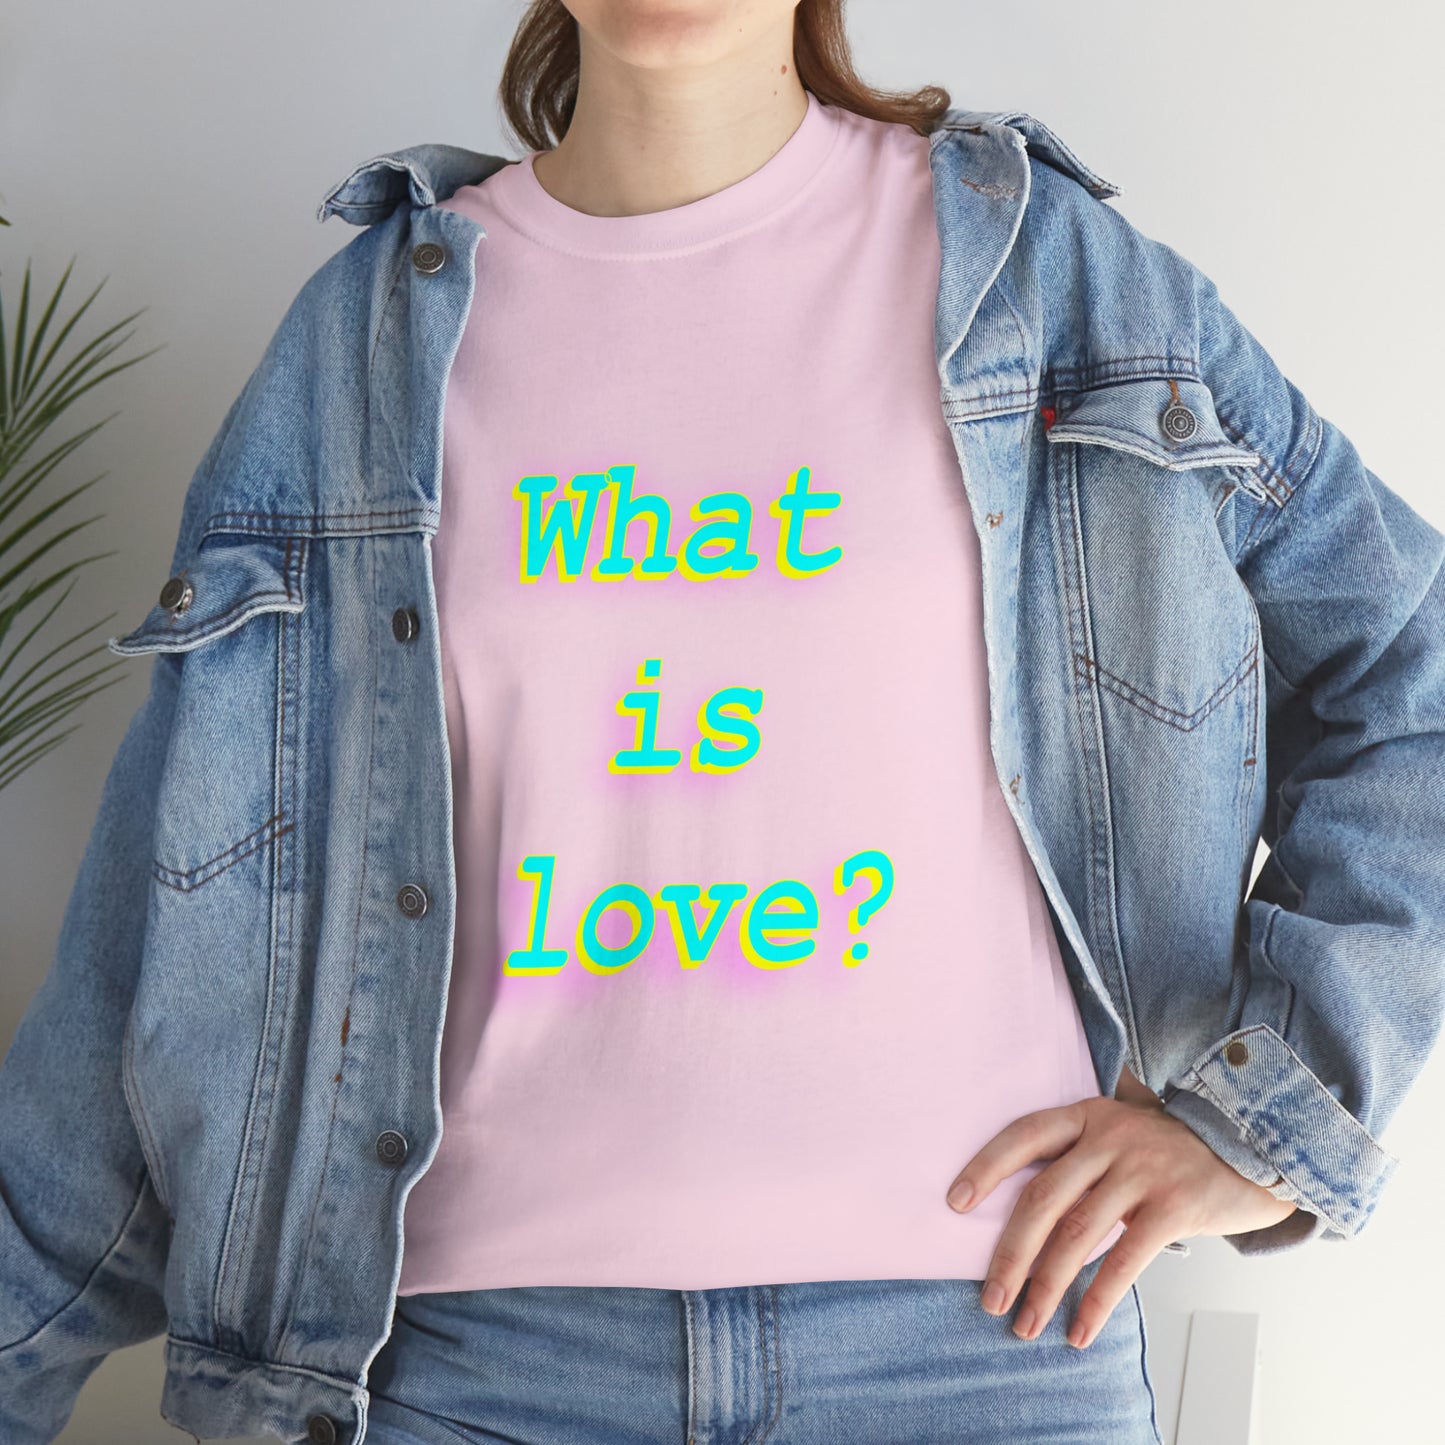 What is love? - Hurts Shirts Collection